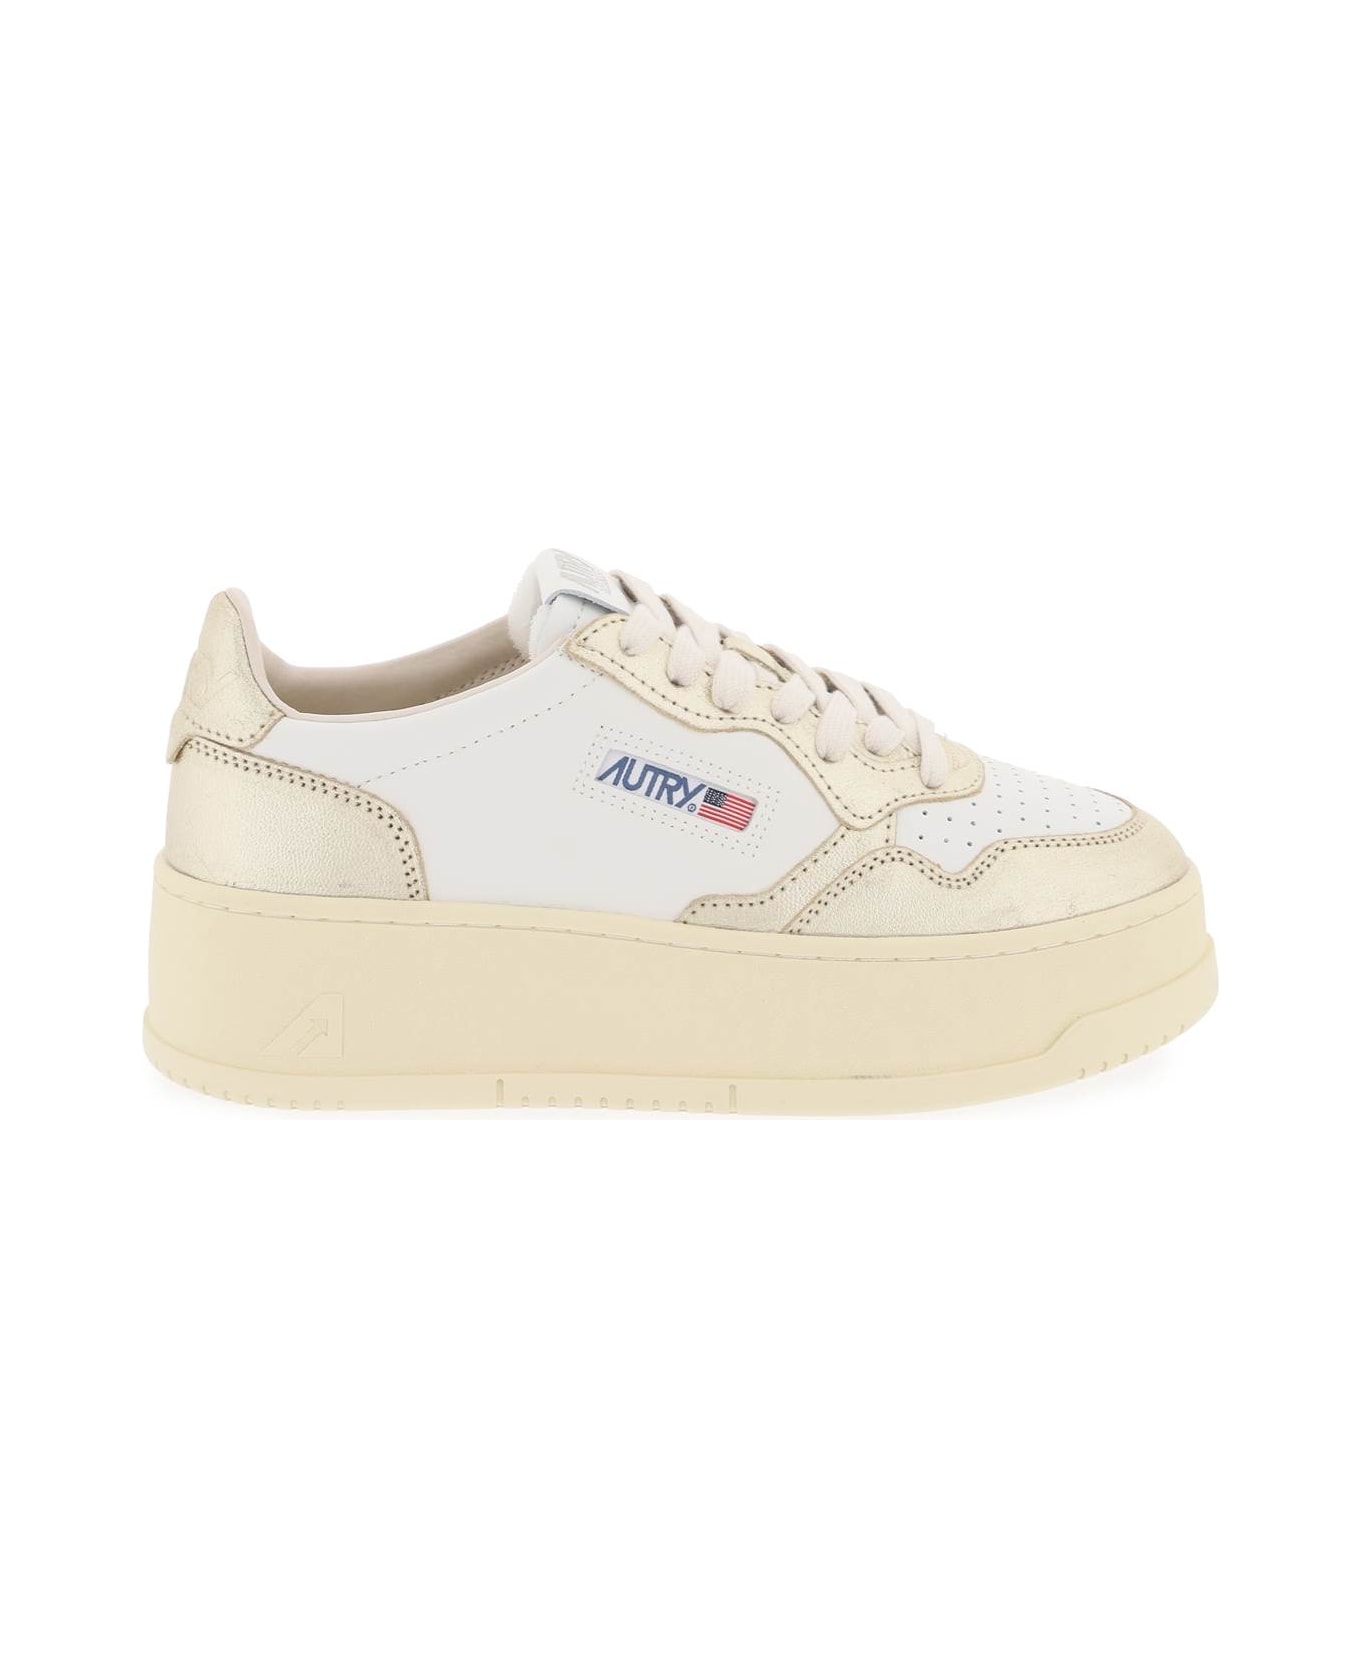 Autry Medalist Low Sneakers - WHITE PLATINUM (White)